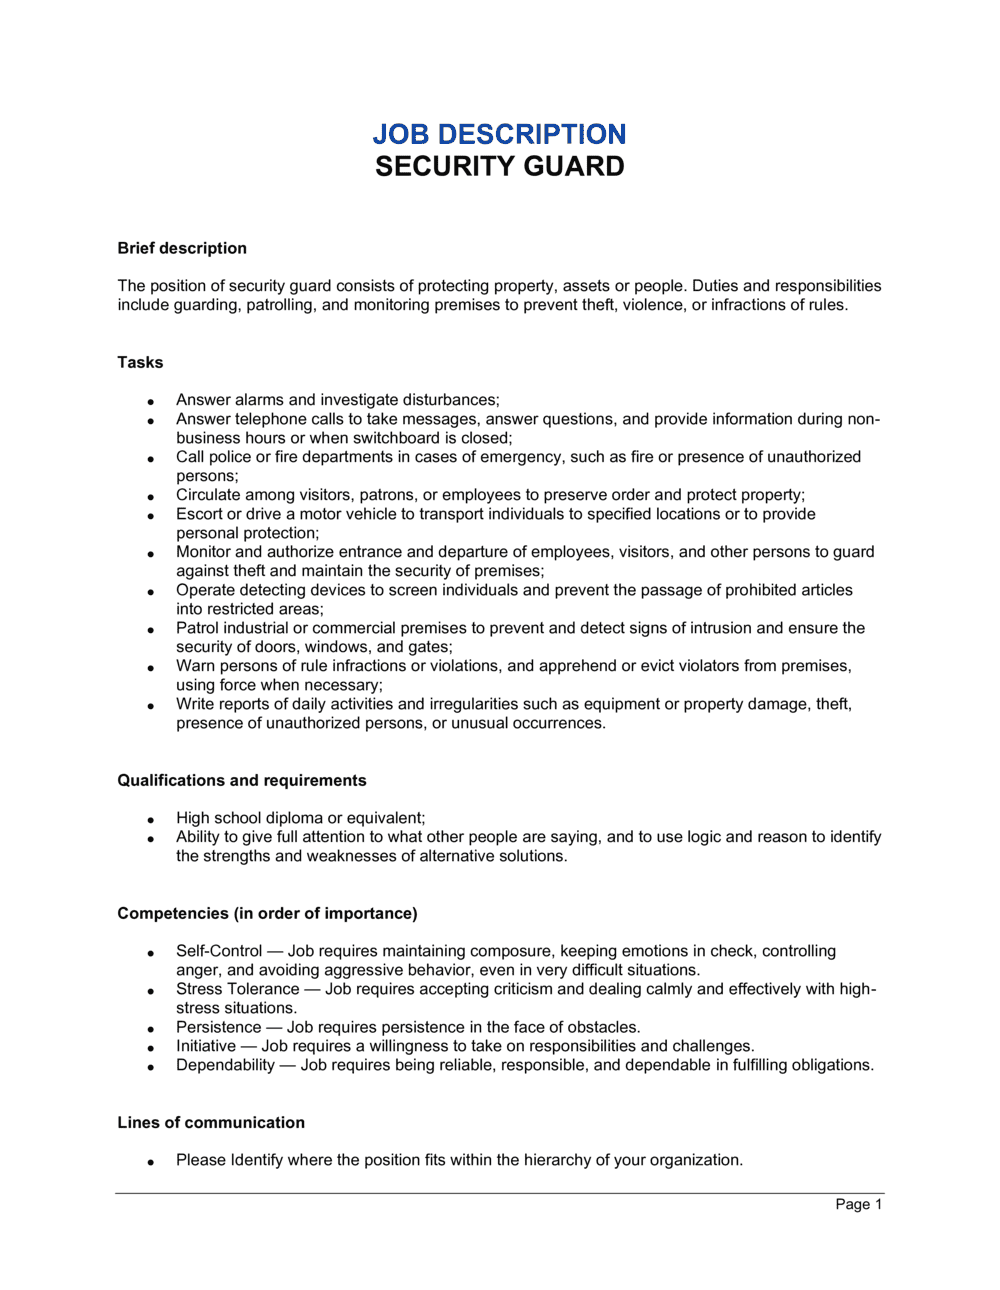 Security Guard Job Description Template  by Business-in-a-Box™ Regarding Security Officer Job Description Template Regarding Security Officer Job Description Template